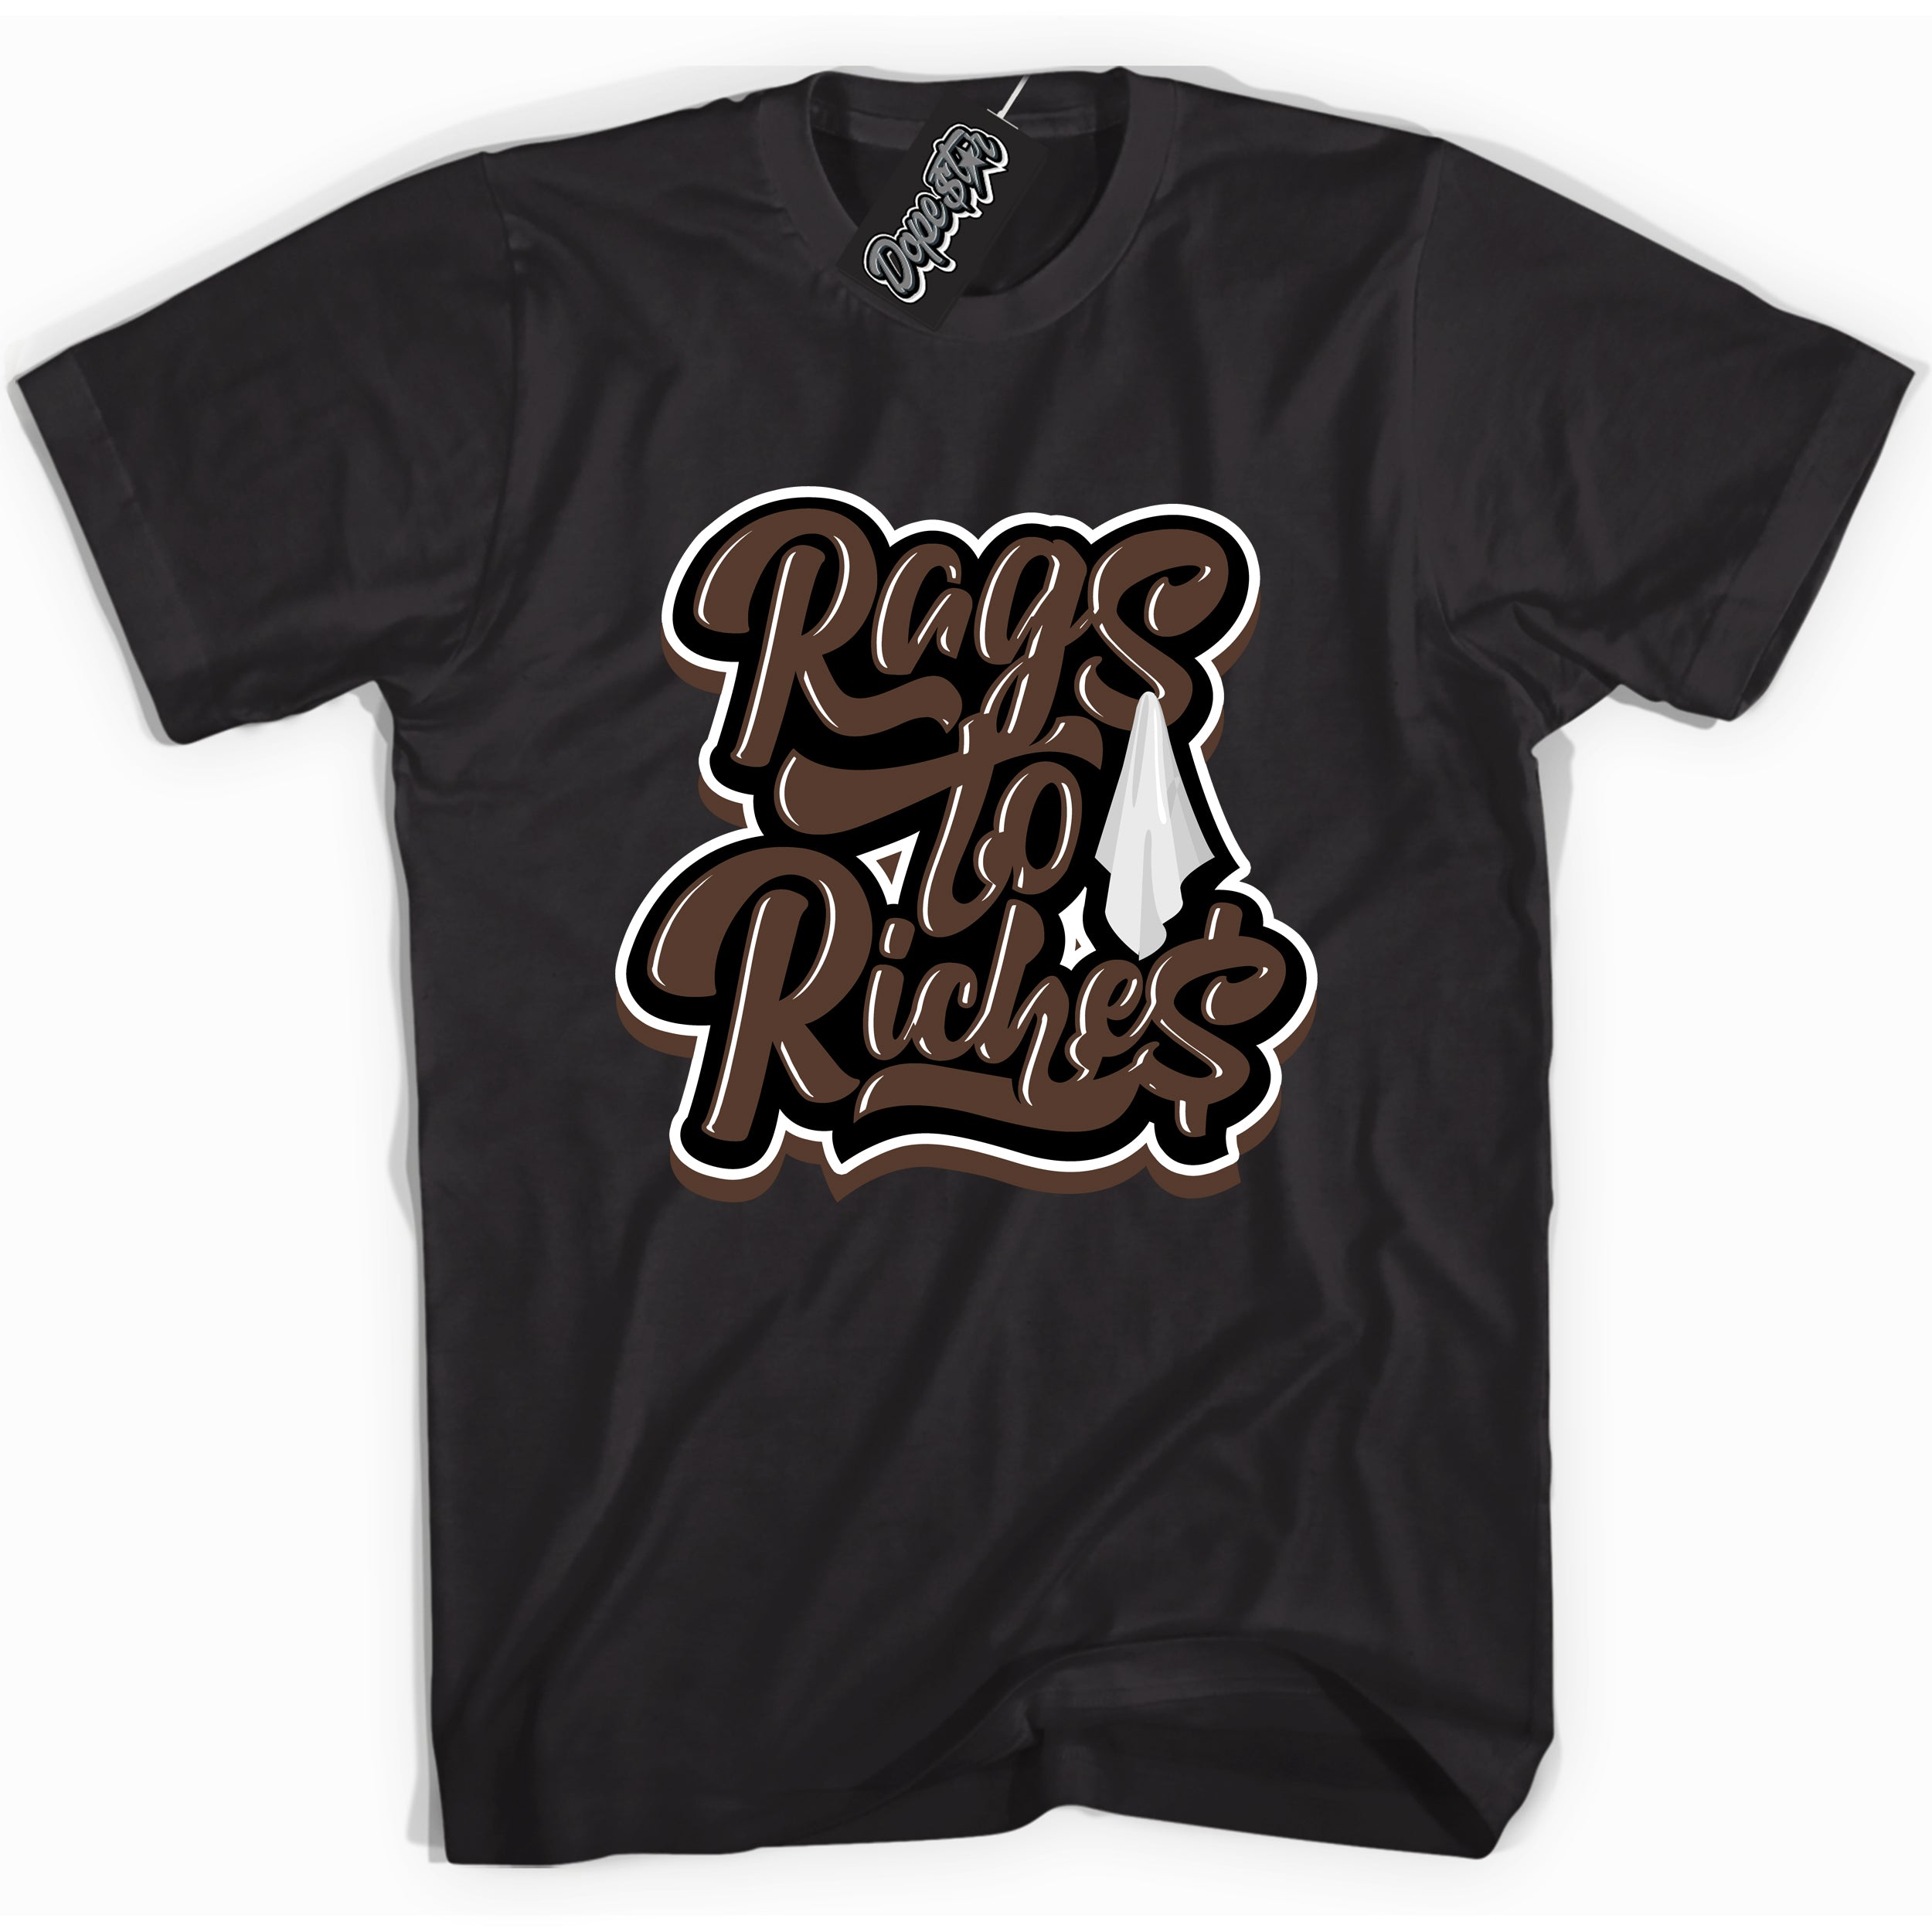 Cool Black graphic tee with “ Rags To Riches ” design, that perfectly matches Palomino 1s sneakers 